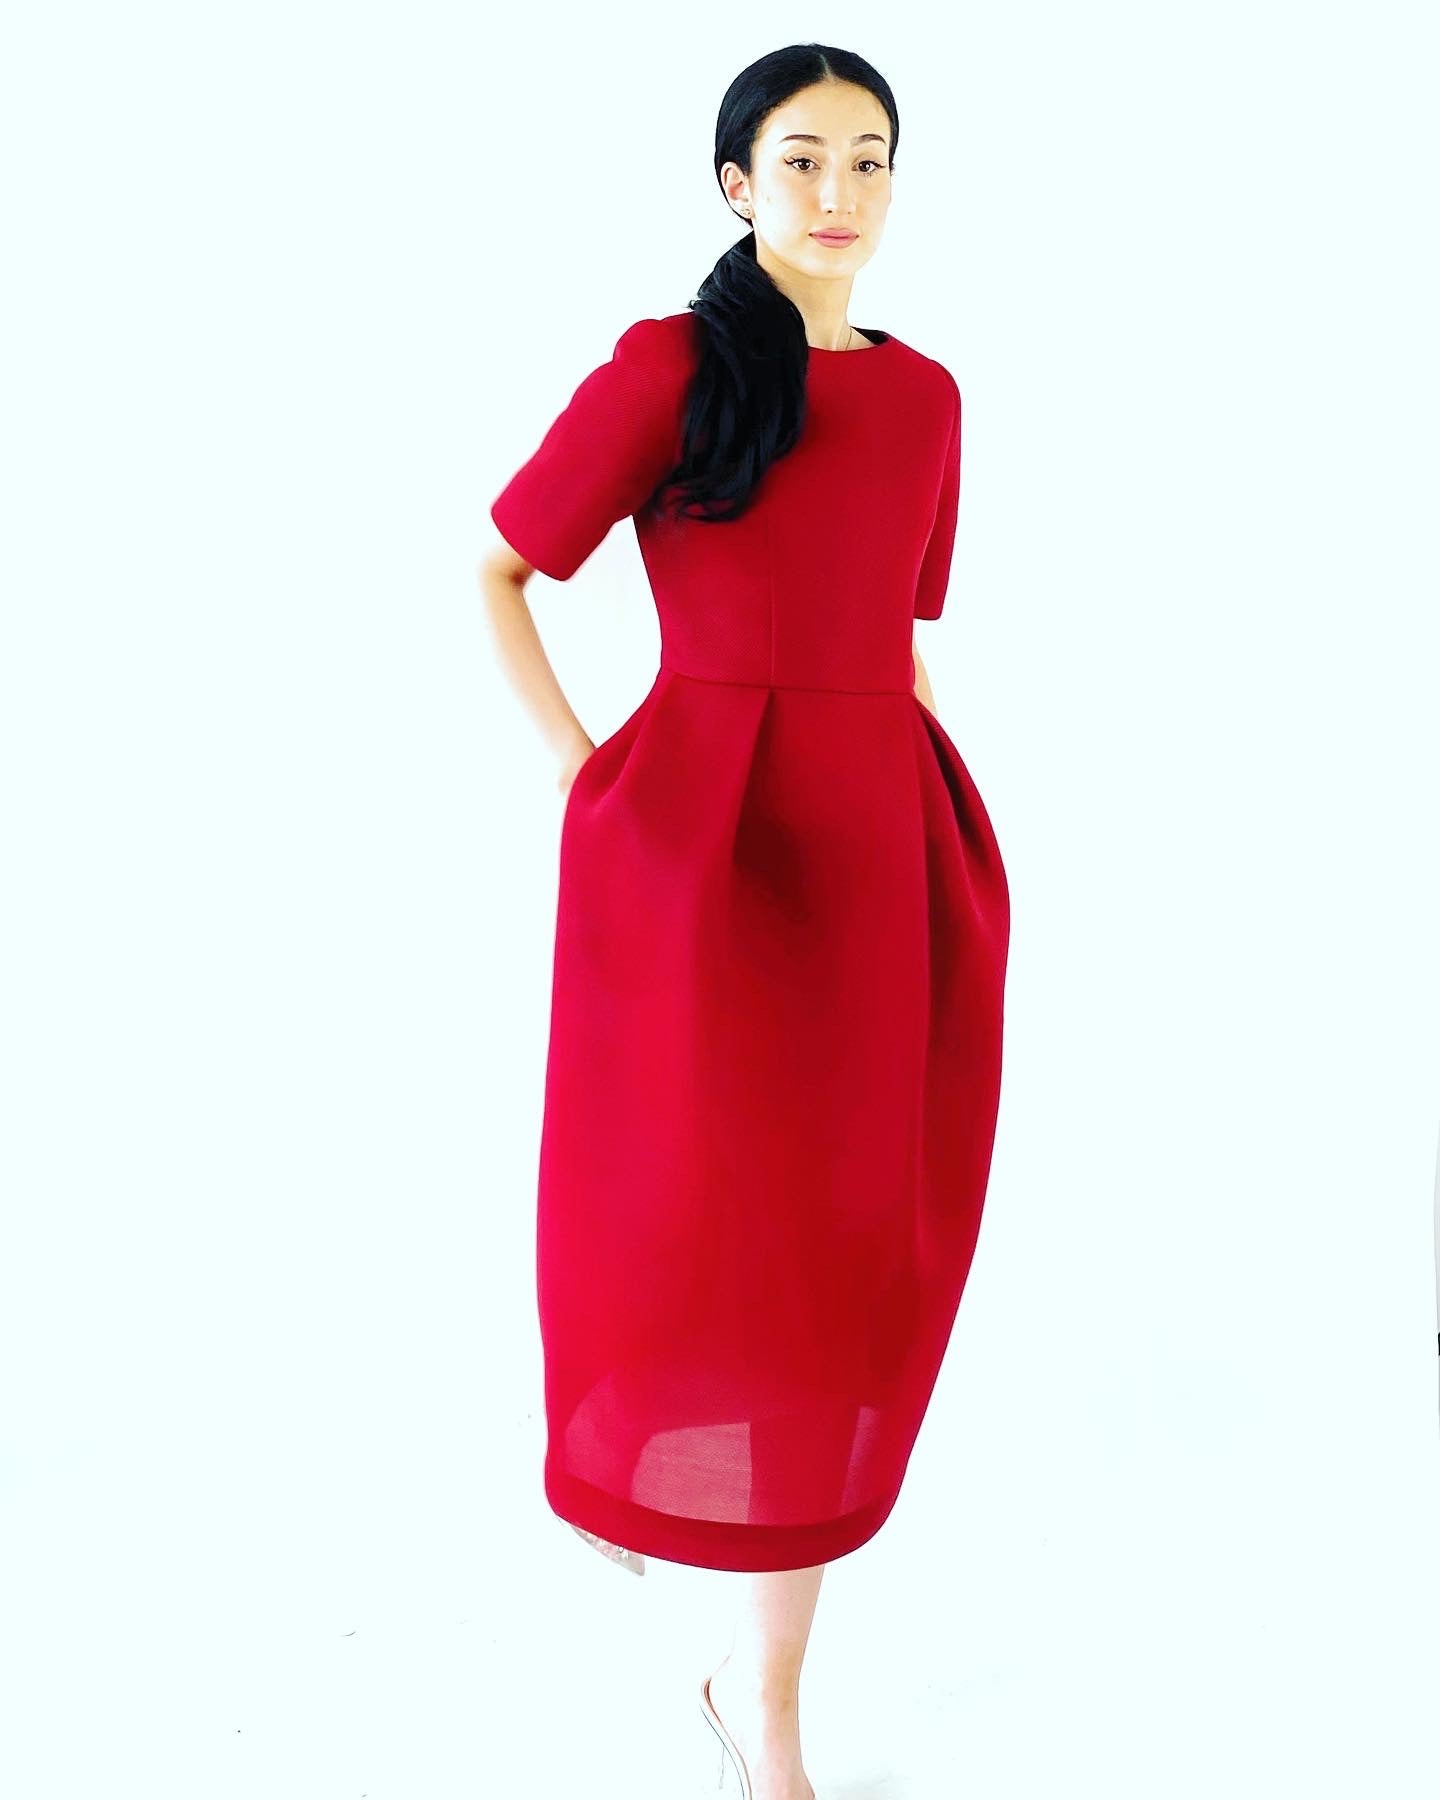 Red cocktail  dress.Tulip style red dress in neoprene